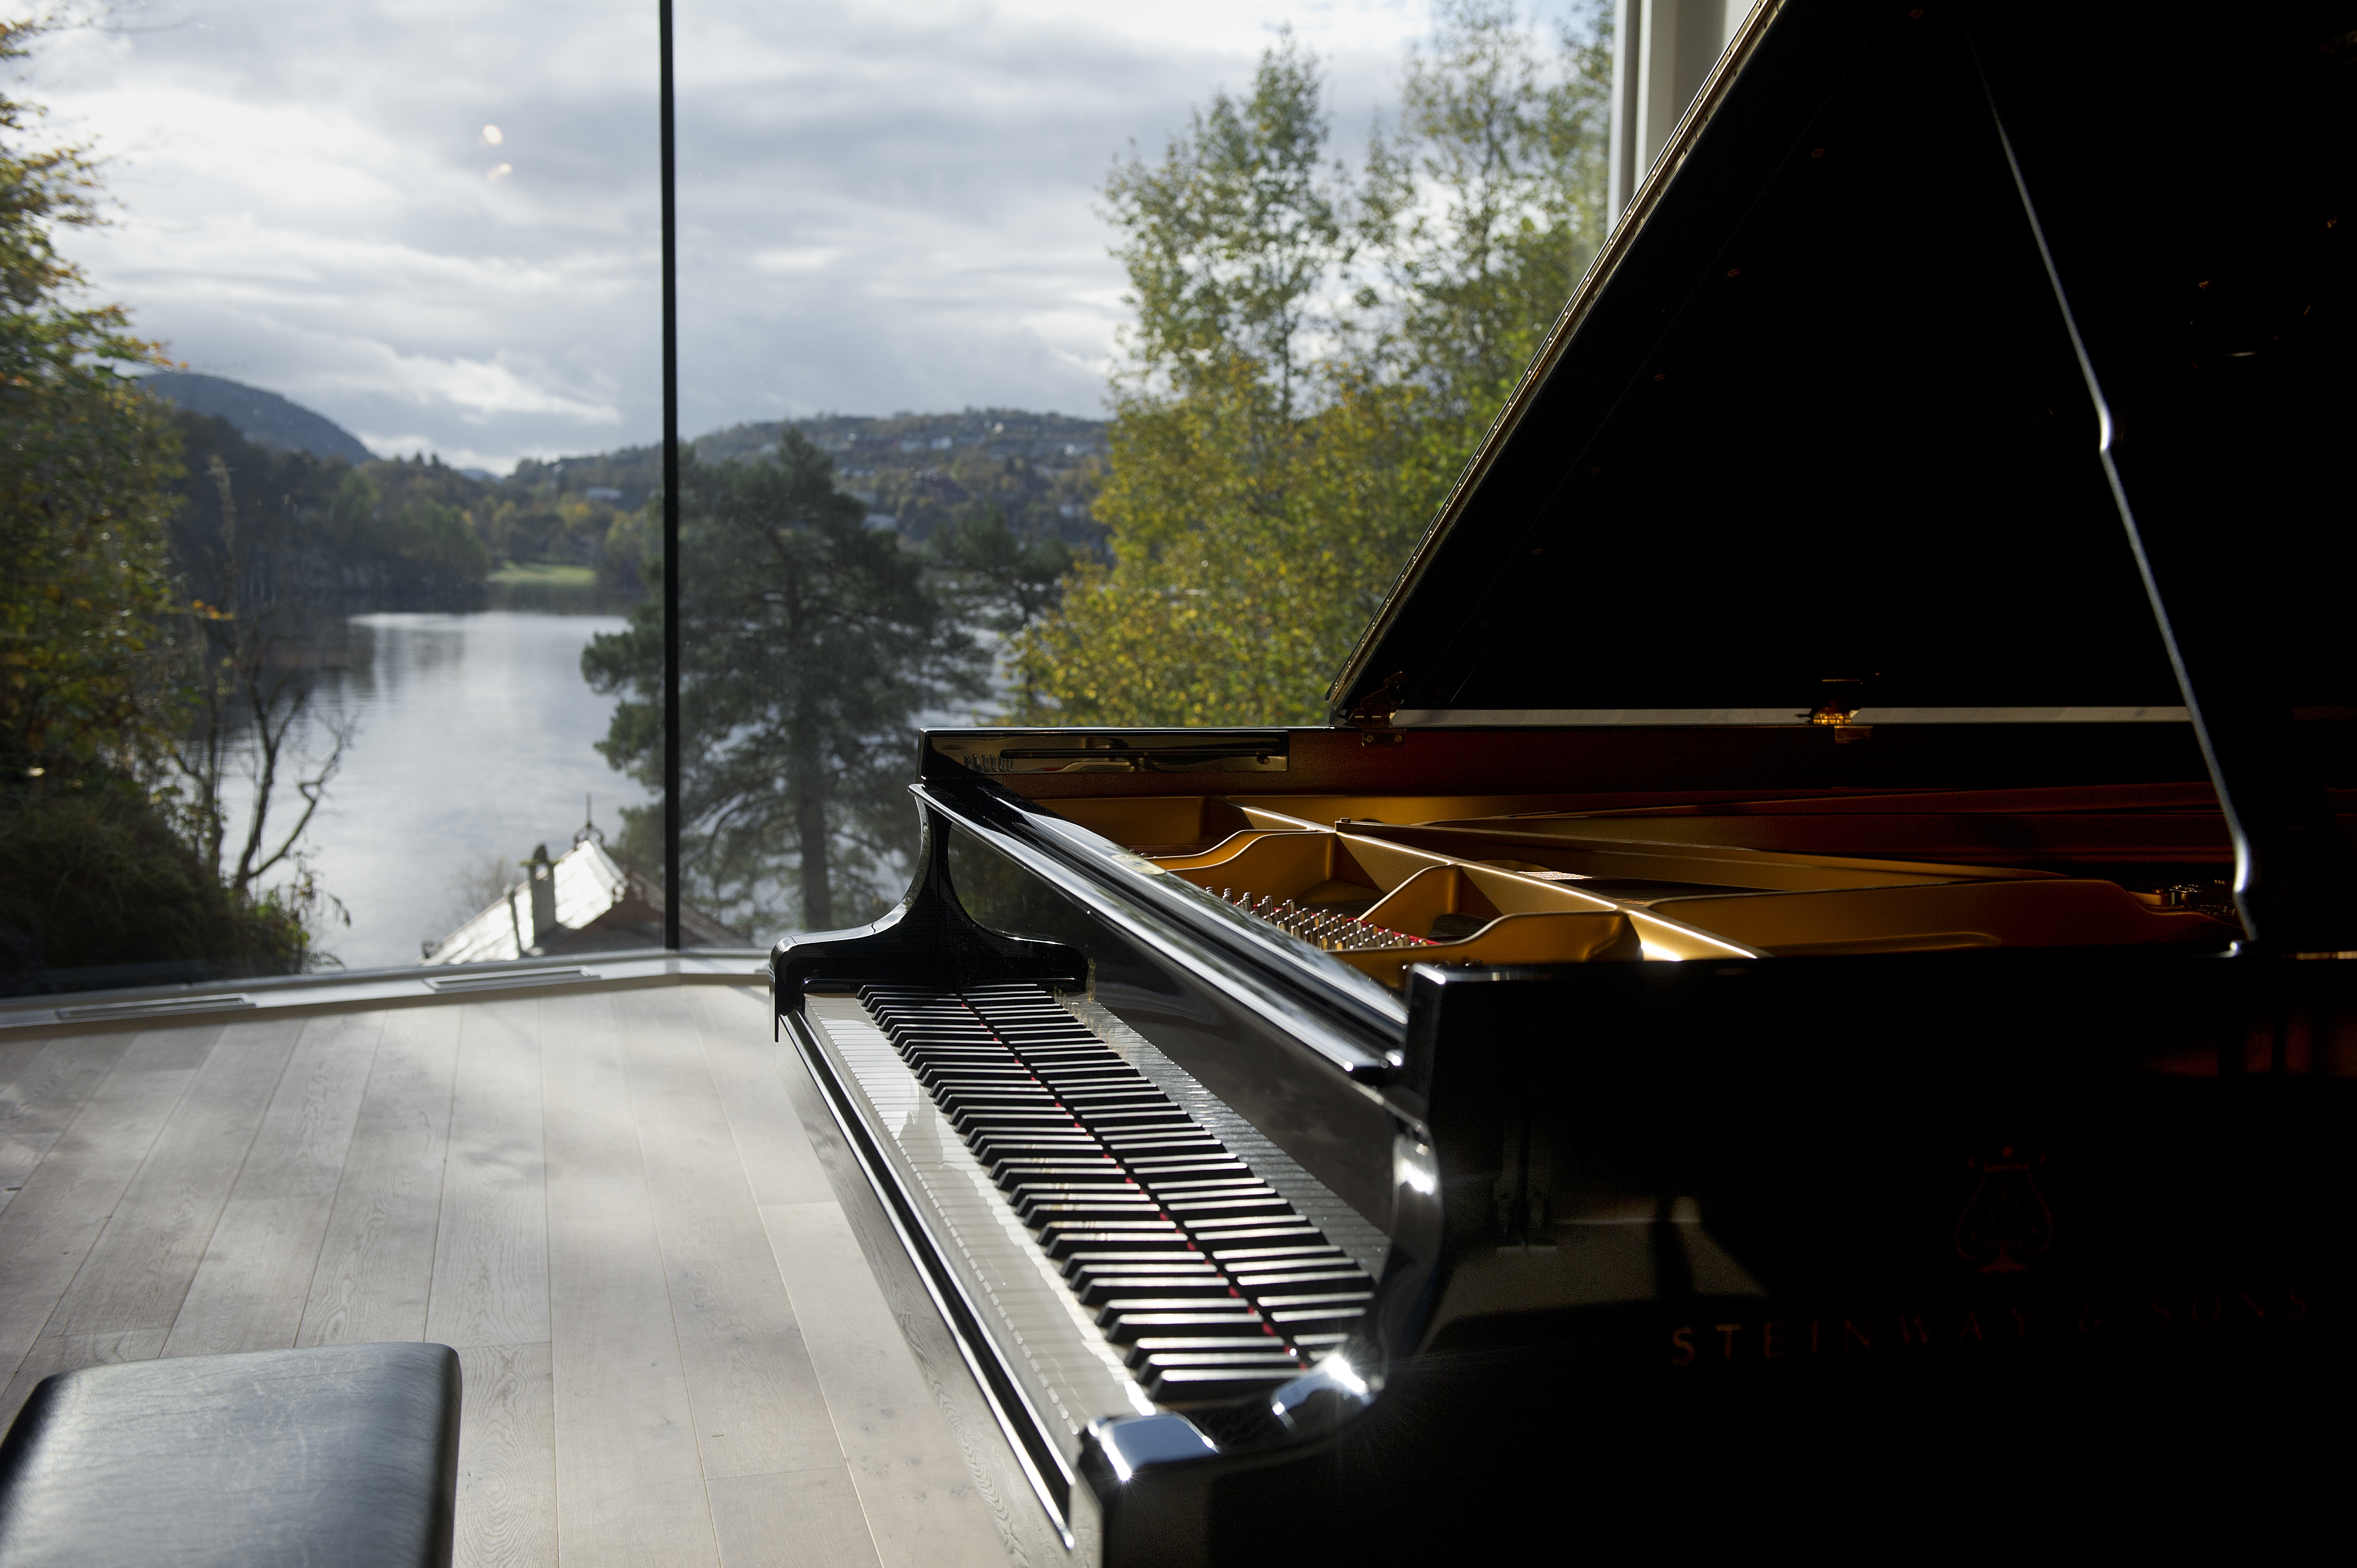 Skodvin: The International Edvard Grieg Piano Competition